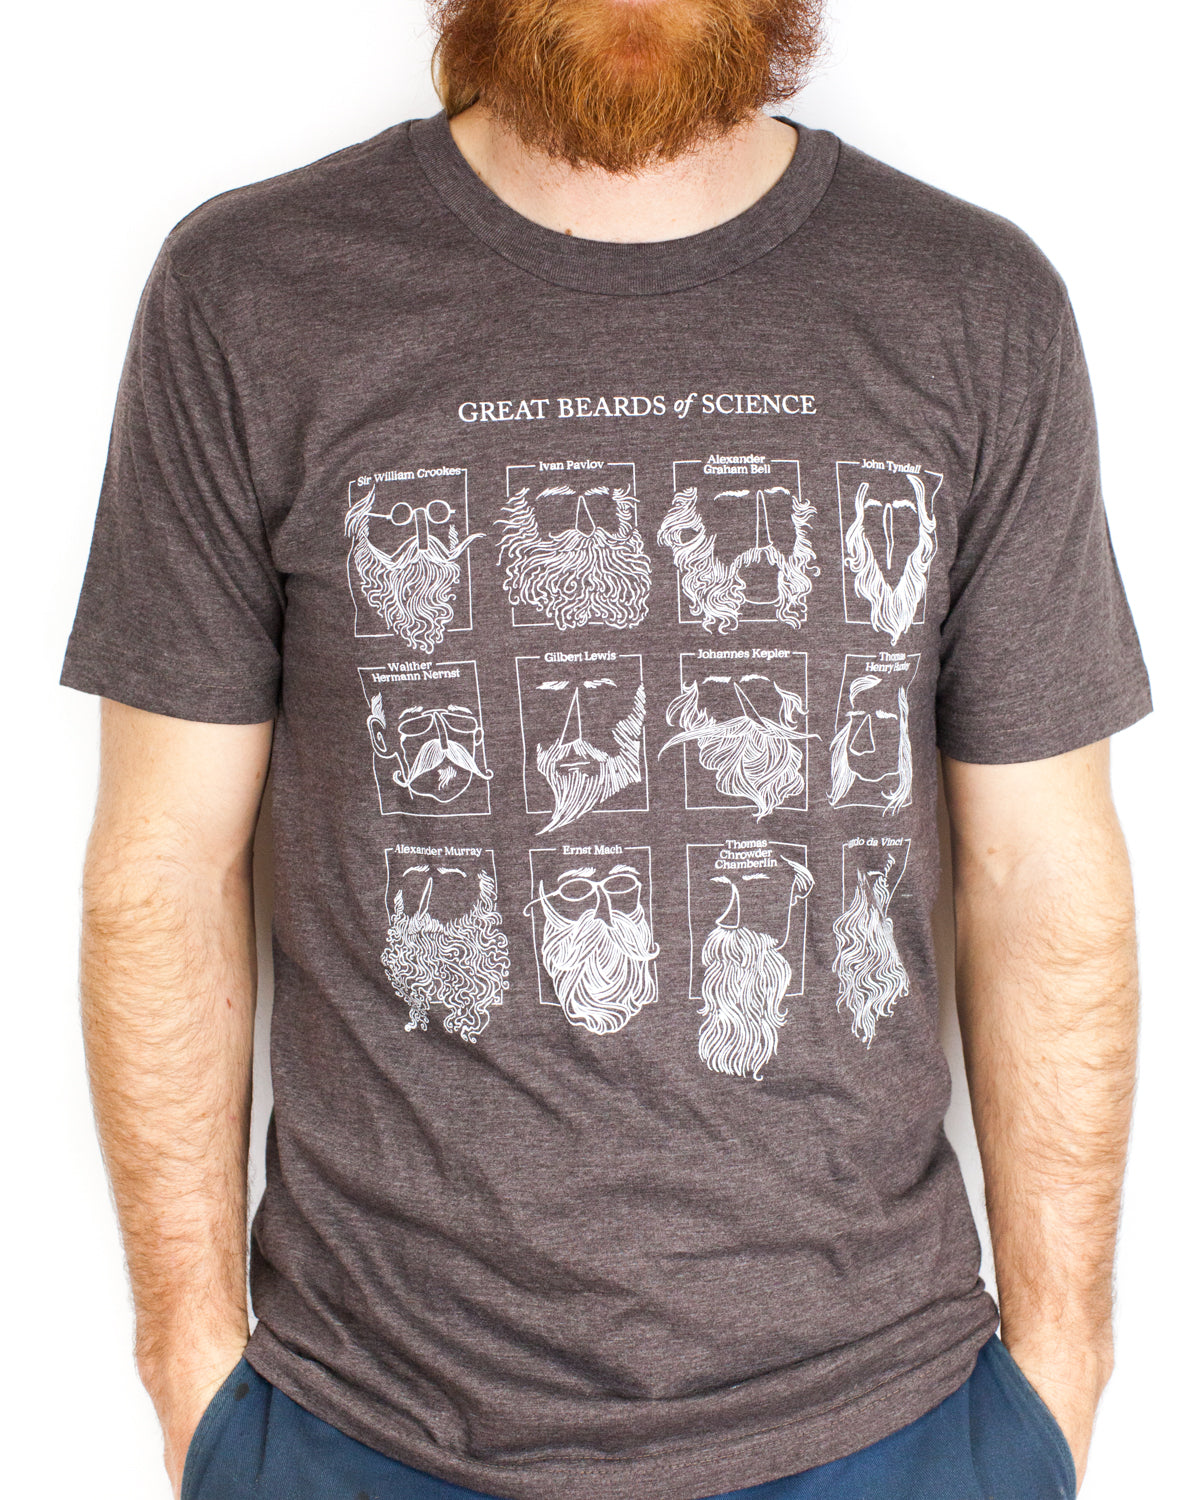 Distinguished Beards of Science Tee Shirt